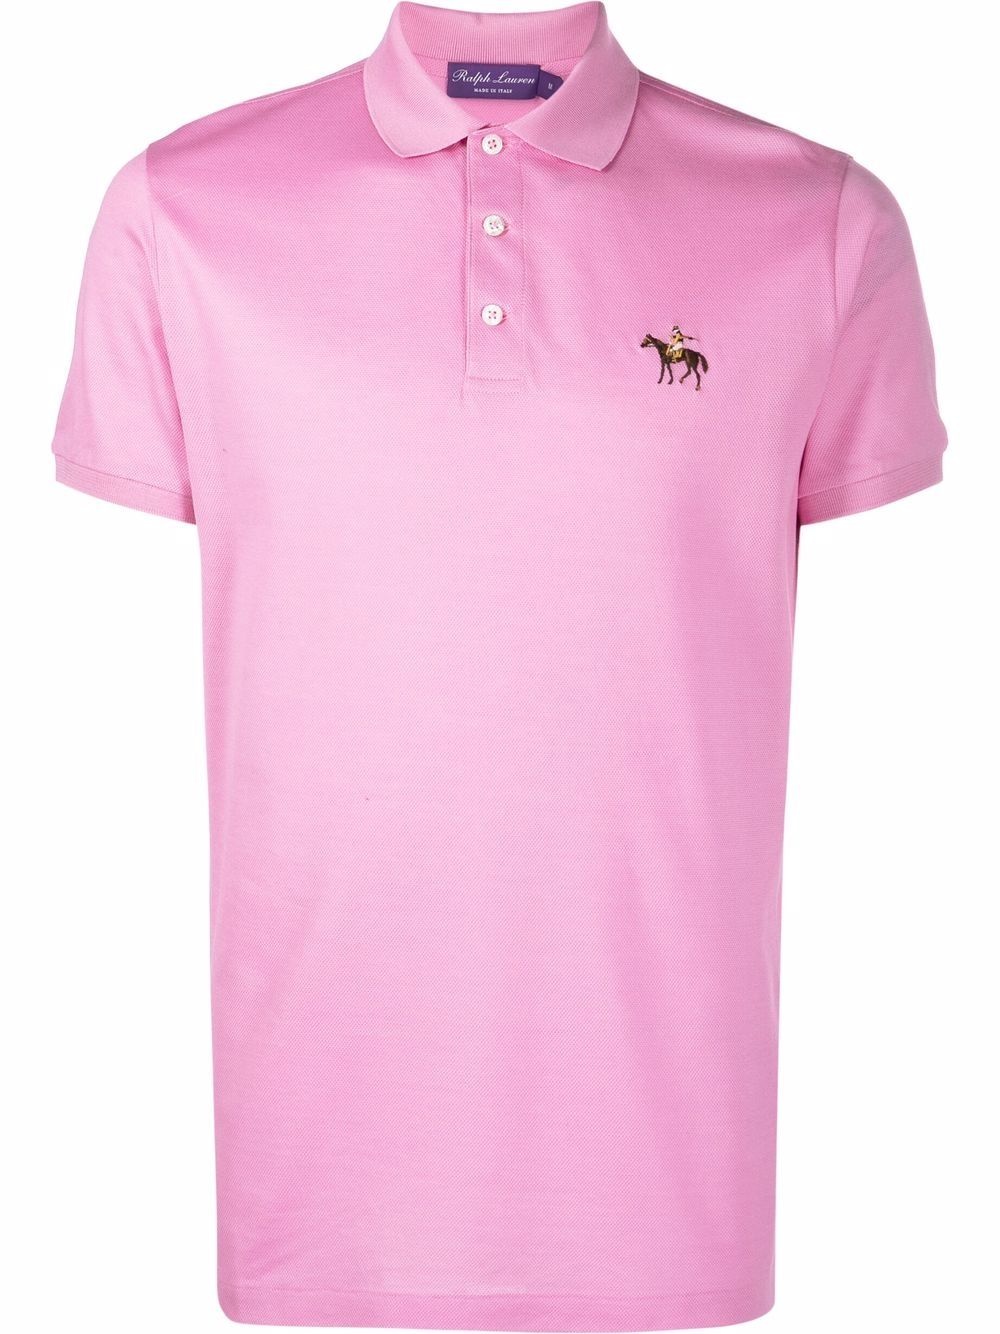 Standing Horse embroidered polo shirt - 2